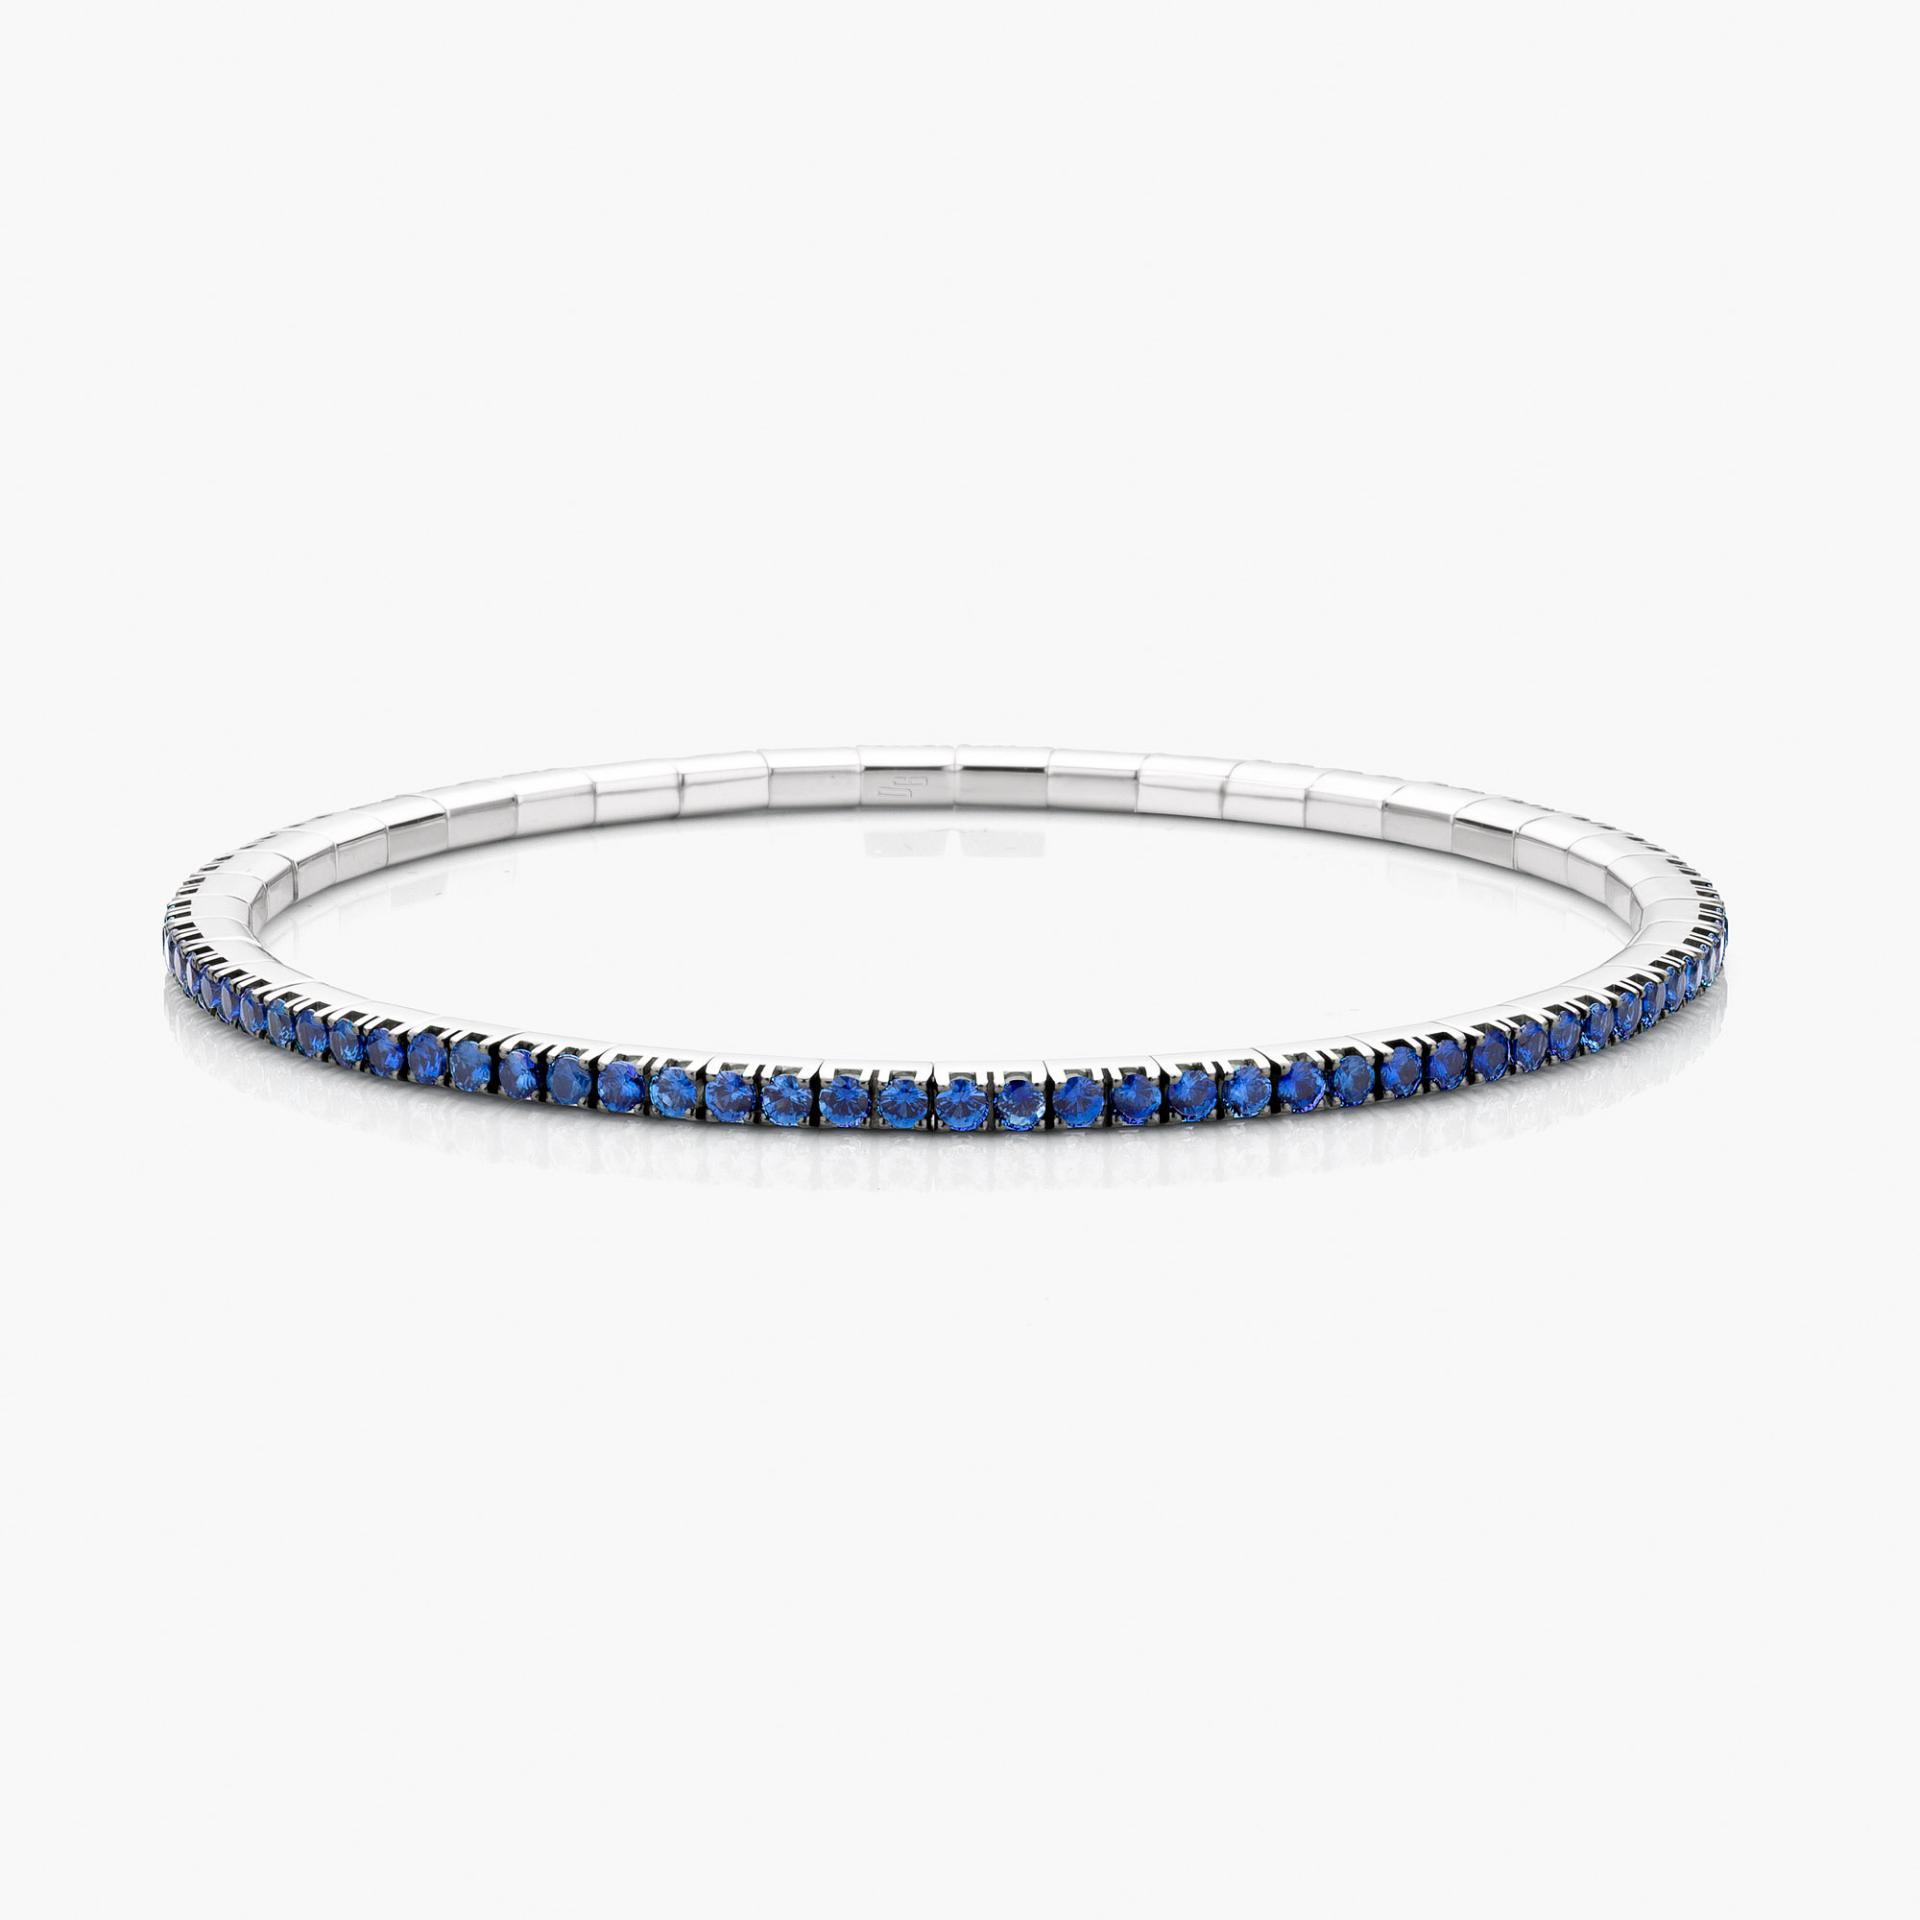 White gold bracelet Extensible set with blue sapphires made by Roberto Demeglio